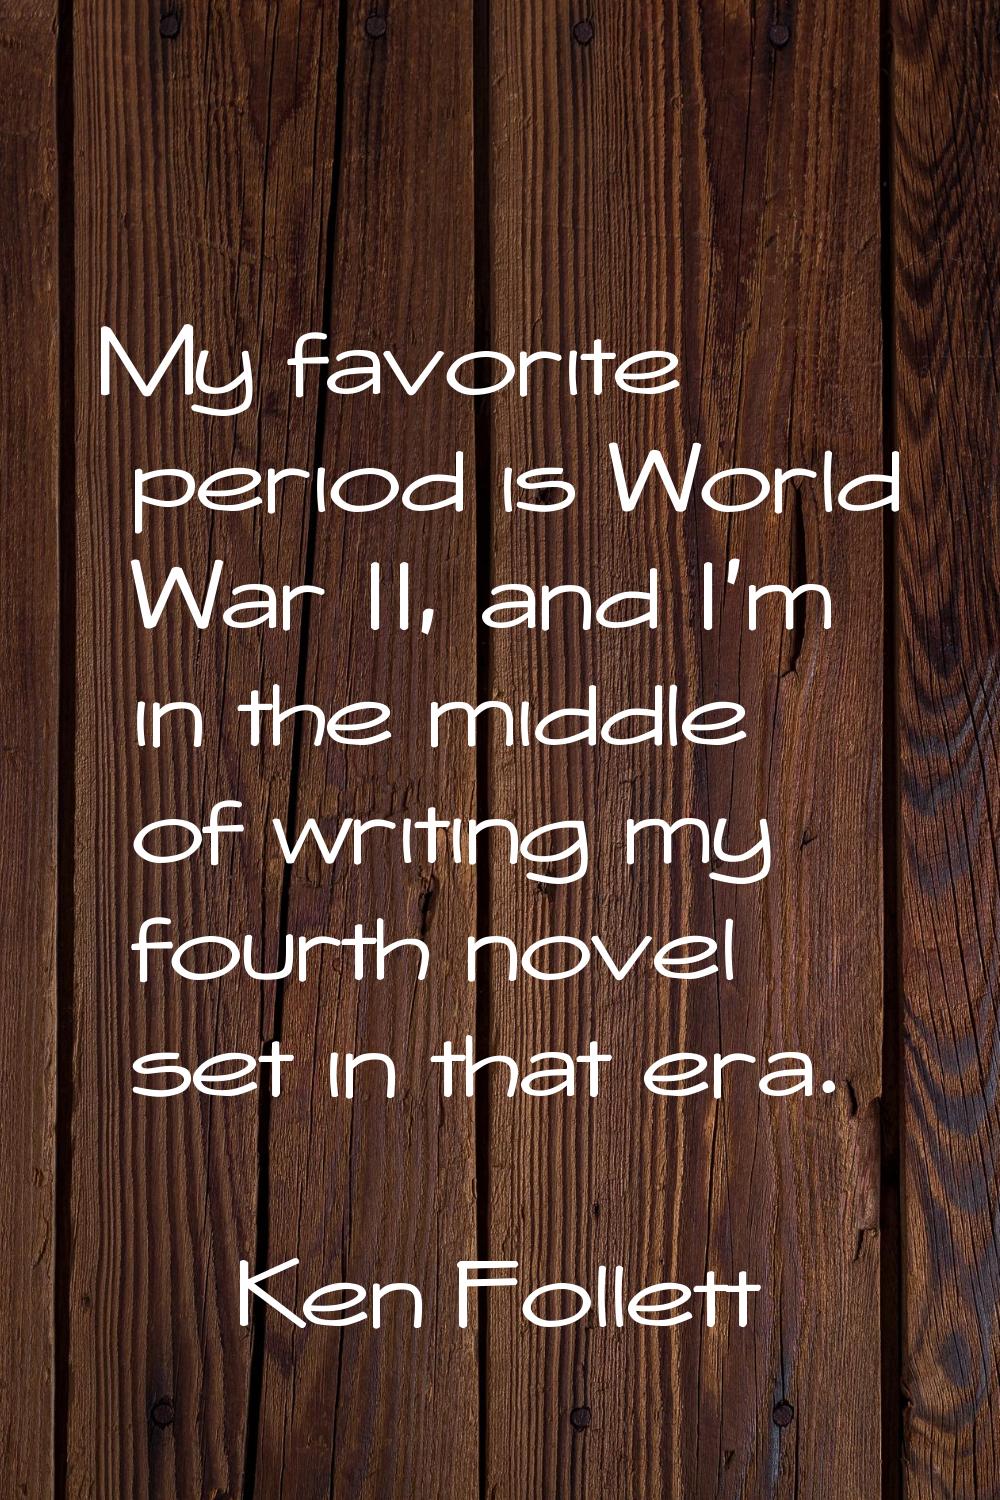 My favorite period is World War II, and I'm in the middle of writing my fourth novel set in that er